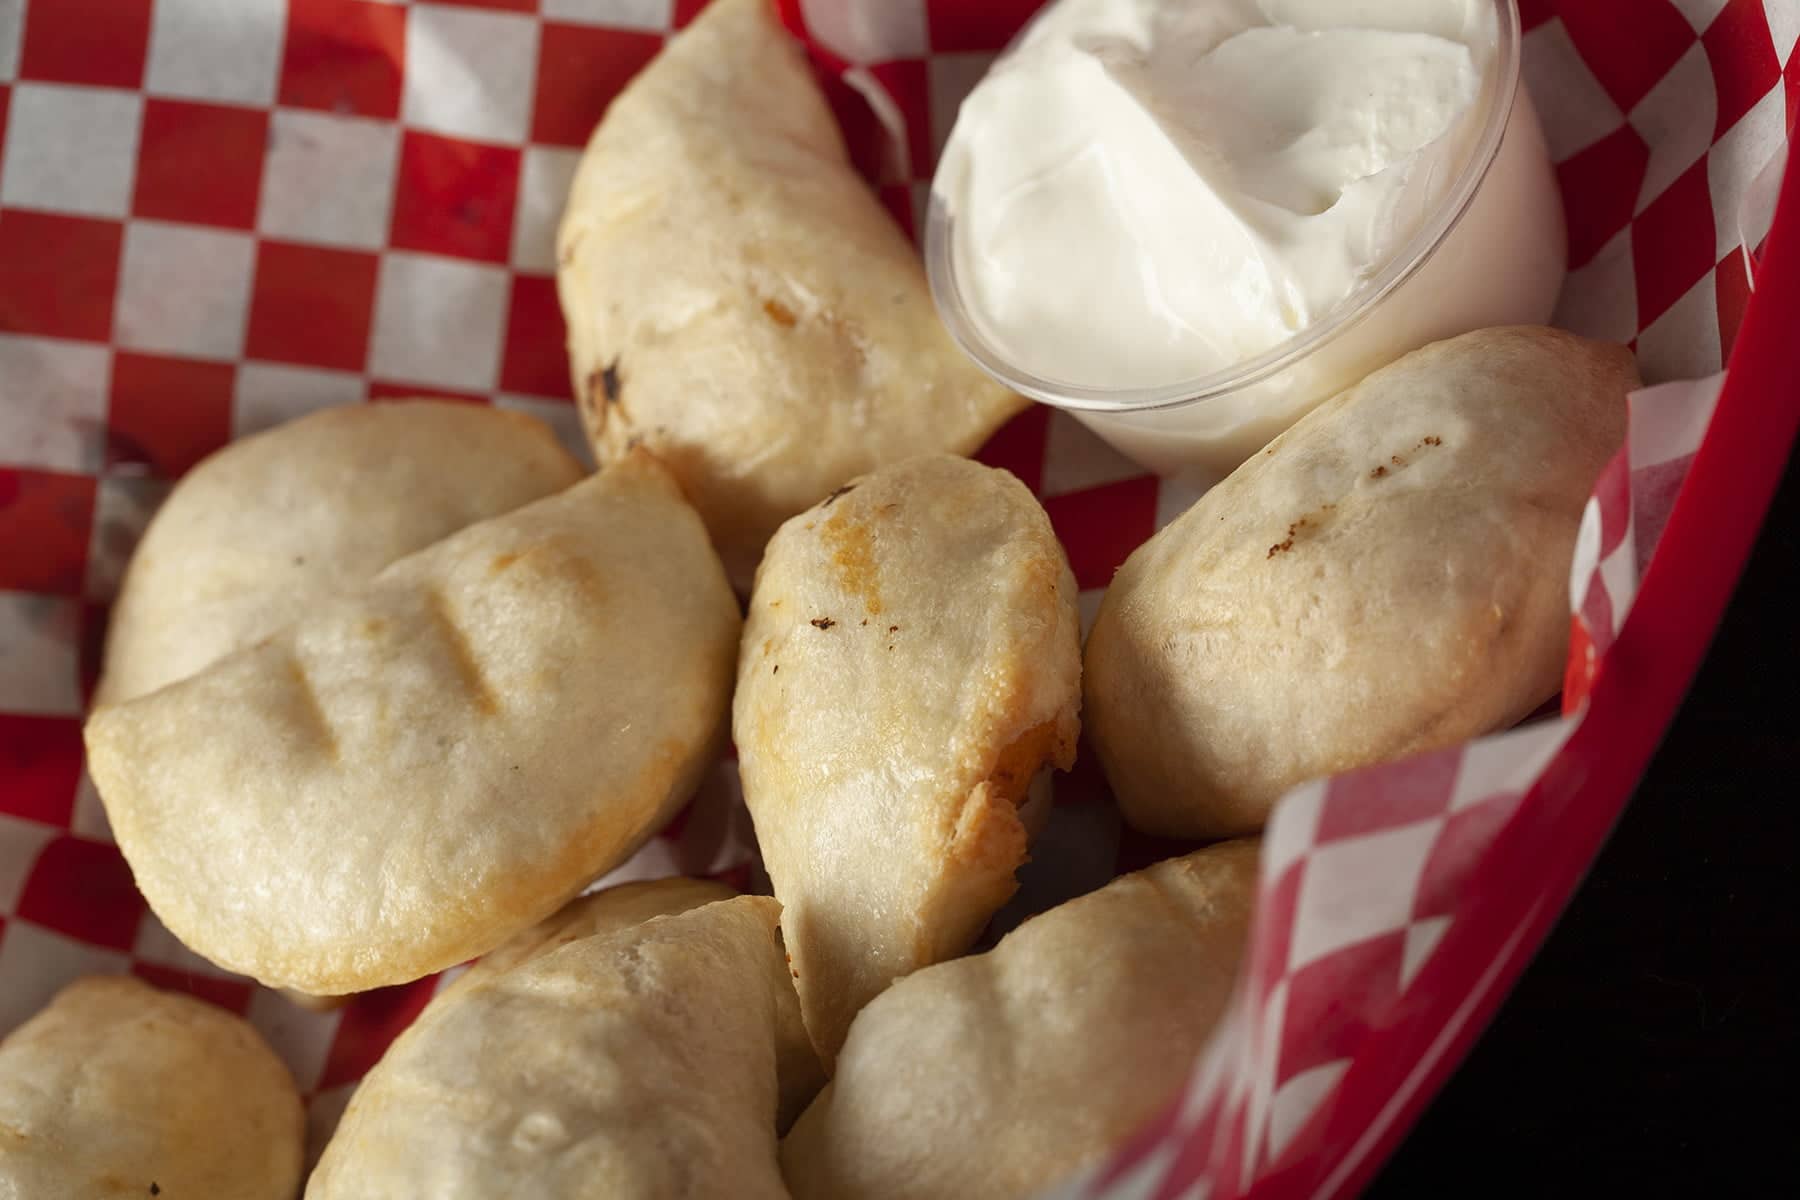 Perfectly fried perogies are mounded in a red basket, accompanied by a small bowl of sour cream.